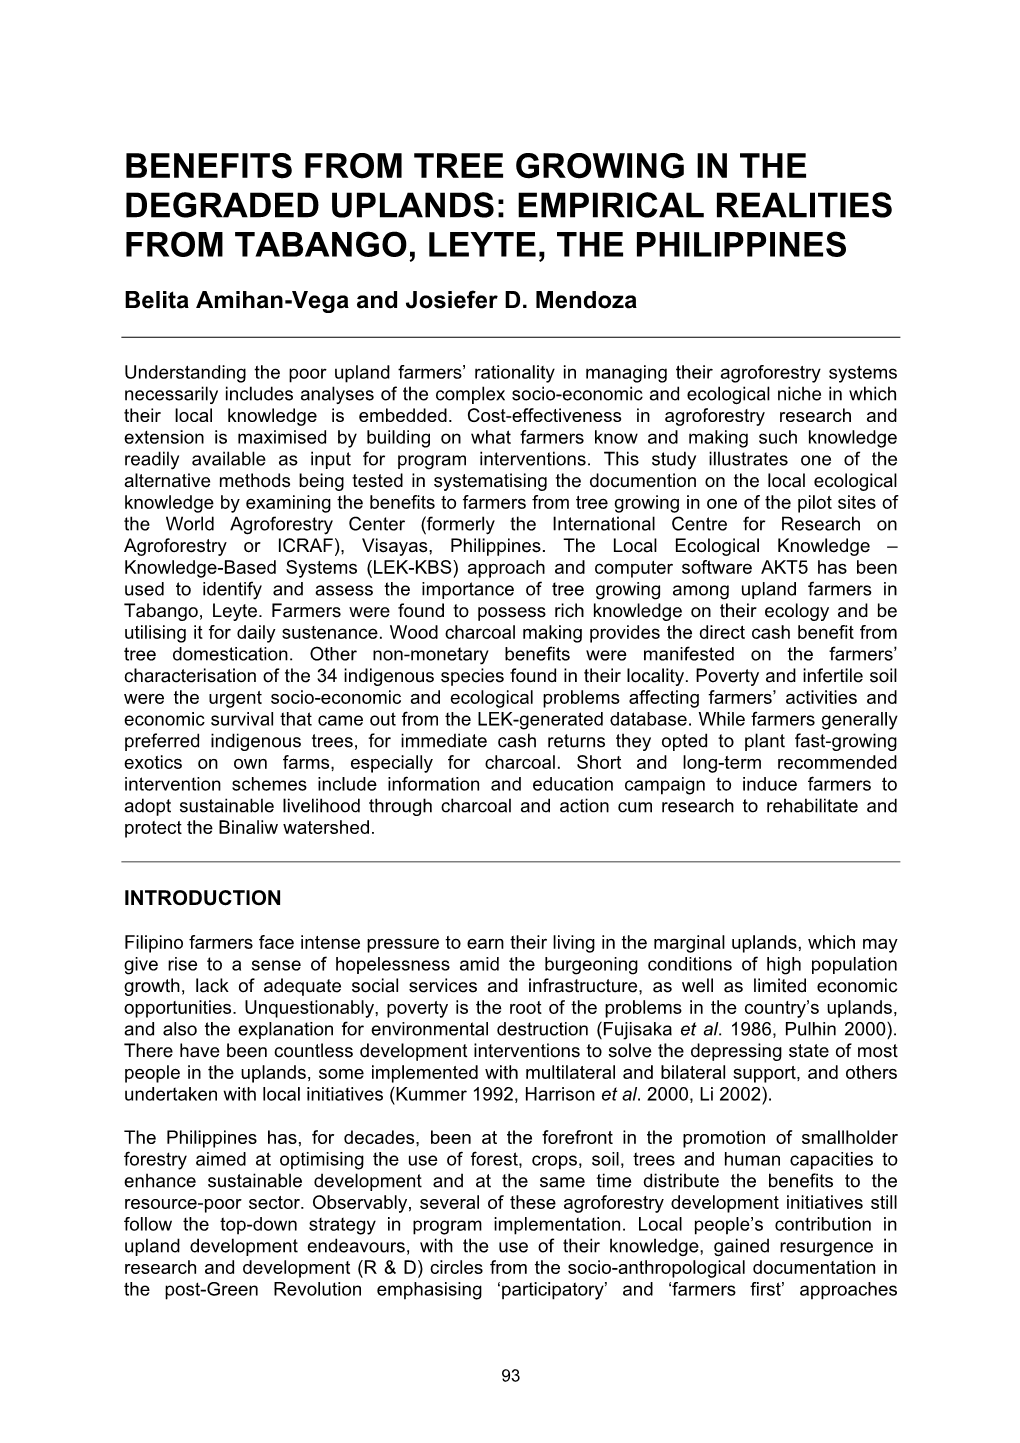 Benefits from Tree Growing in the Degraded Uplands: Empirical Realities from Tabango, Leyte, the Philippines